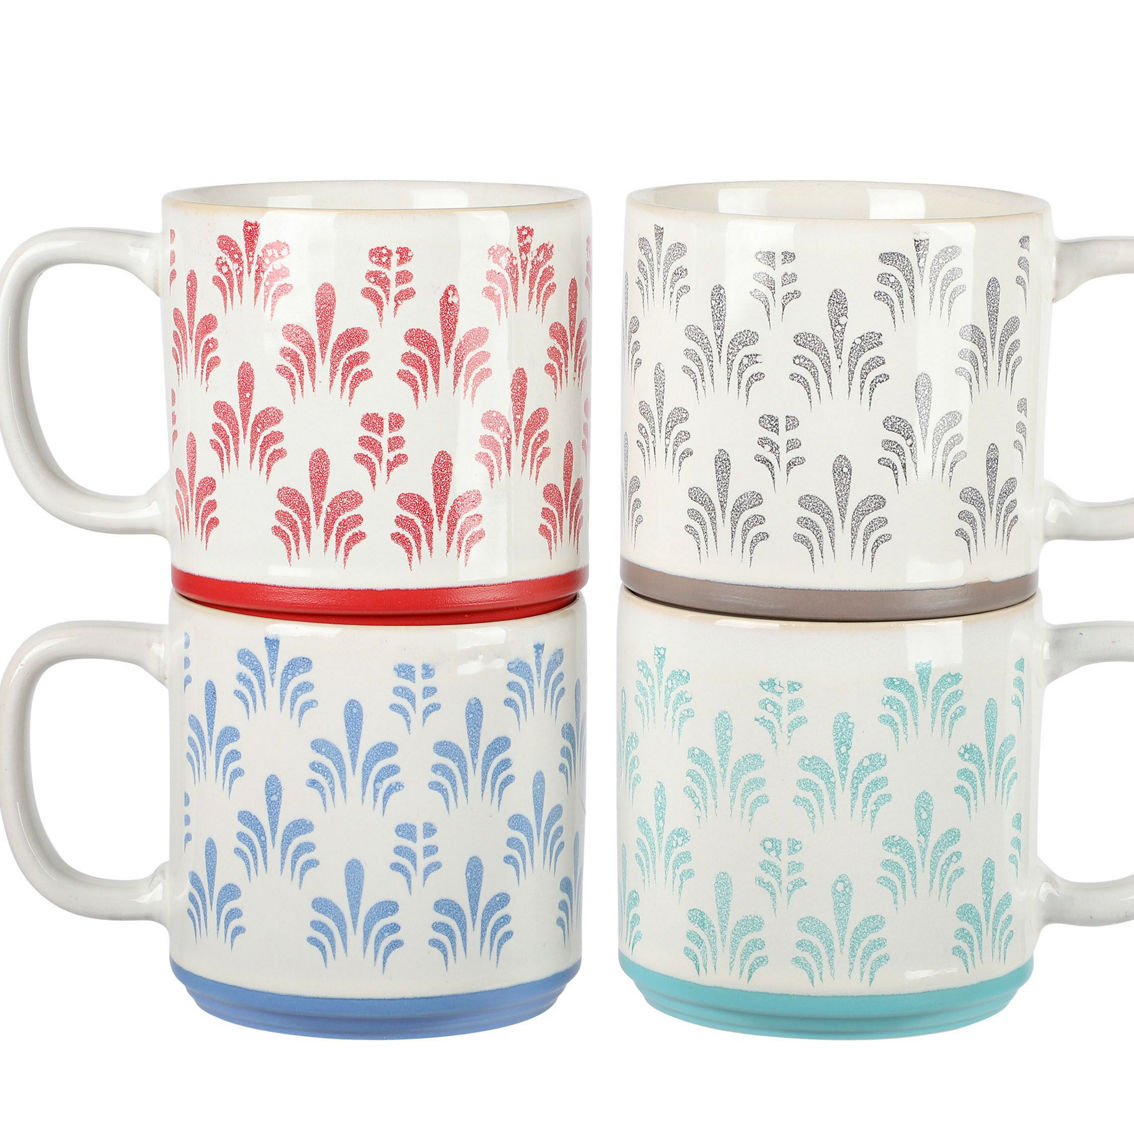 Gibson Home Morning Mist 4 Piece 18 Ounce Stoneware Mug Set in Assorted Colors - Image 1 of 5